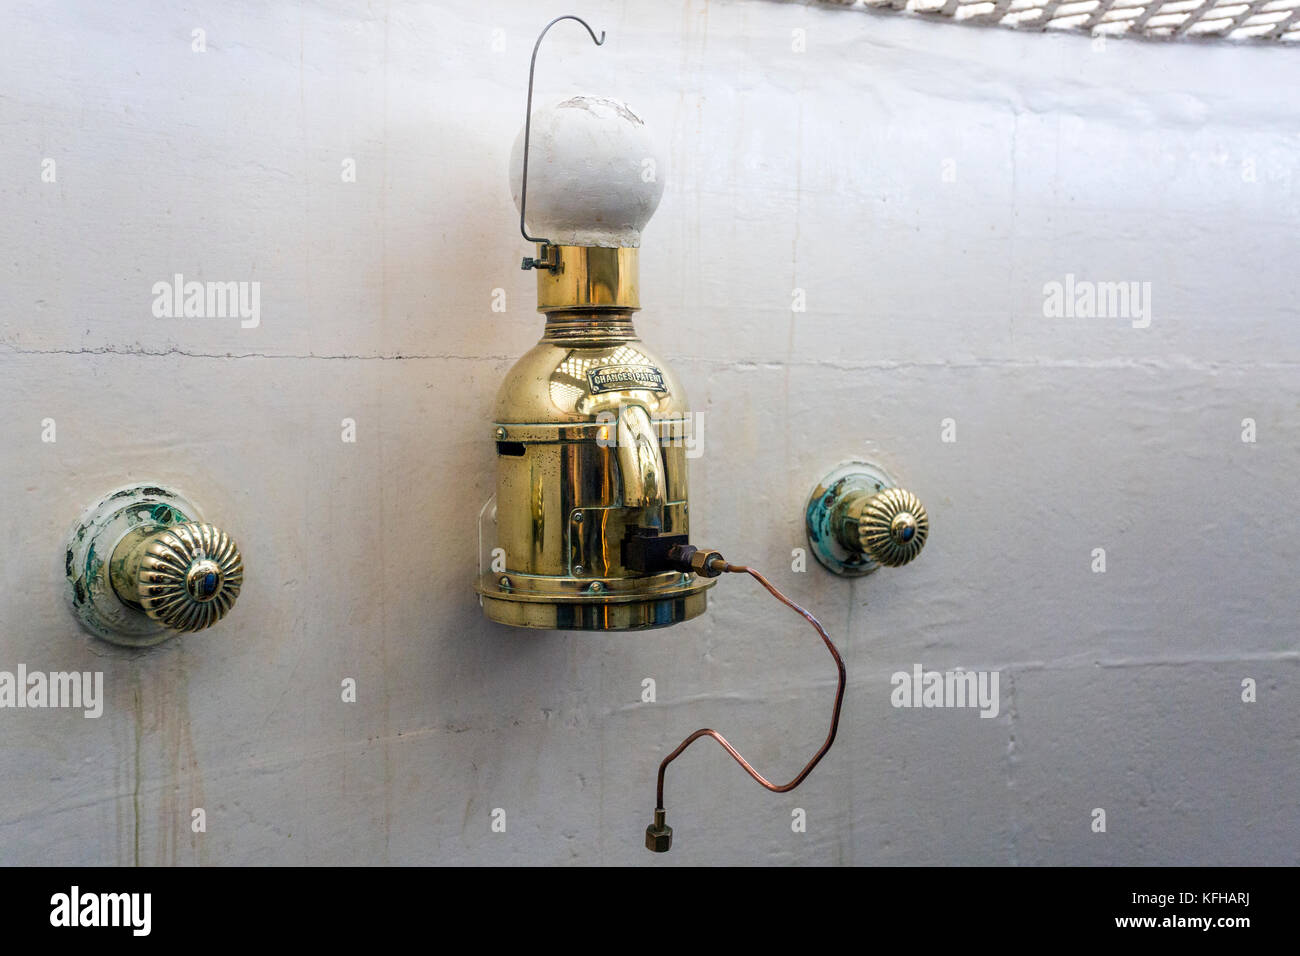 An early form of paraffin vapour burner displayed in the lantern of Kinnaird Head lighthouse,  Fraserburgh, Aberdeenshire, Scotland, UK Stock Photo